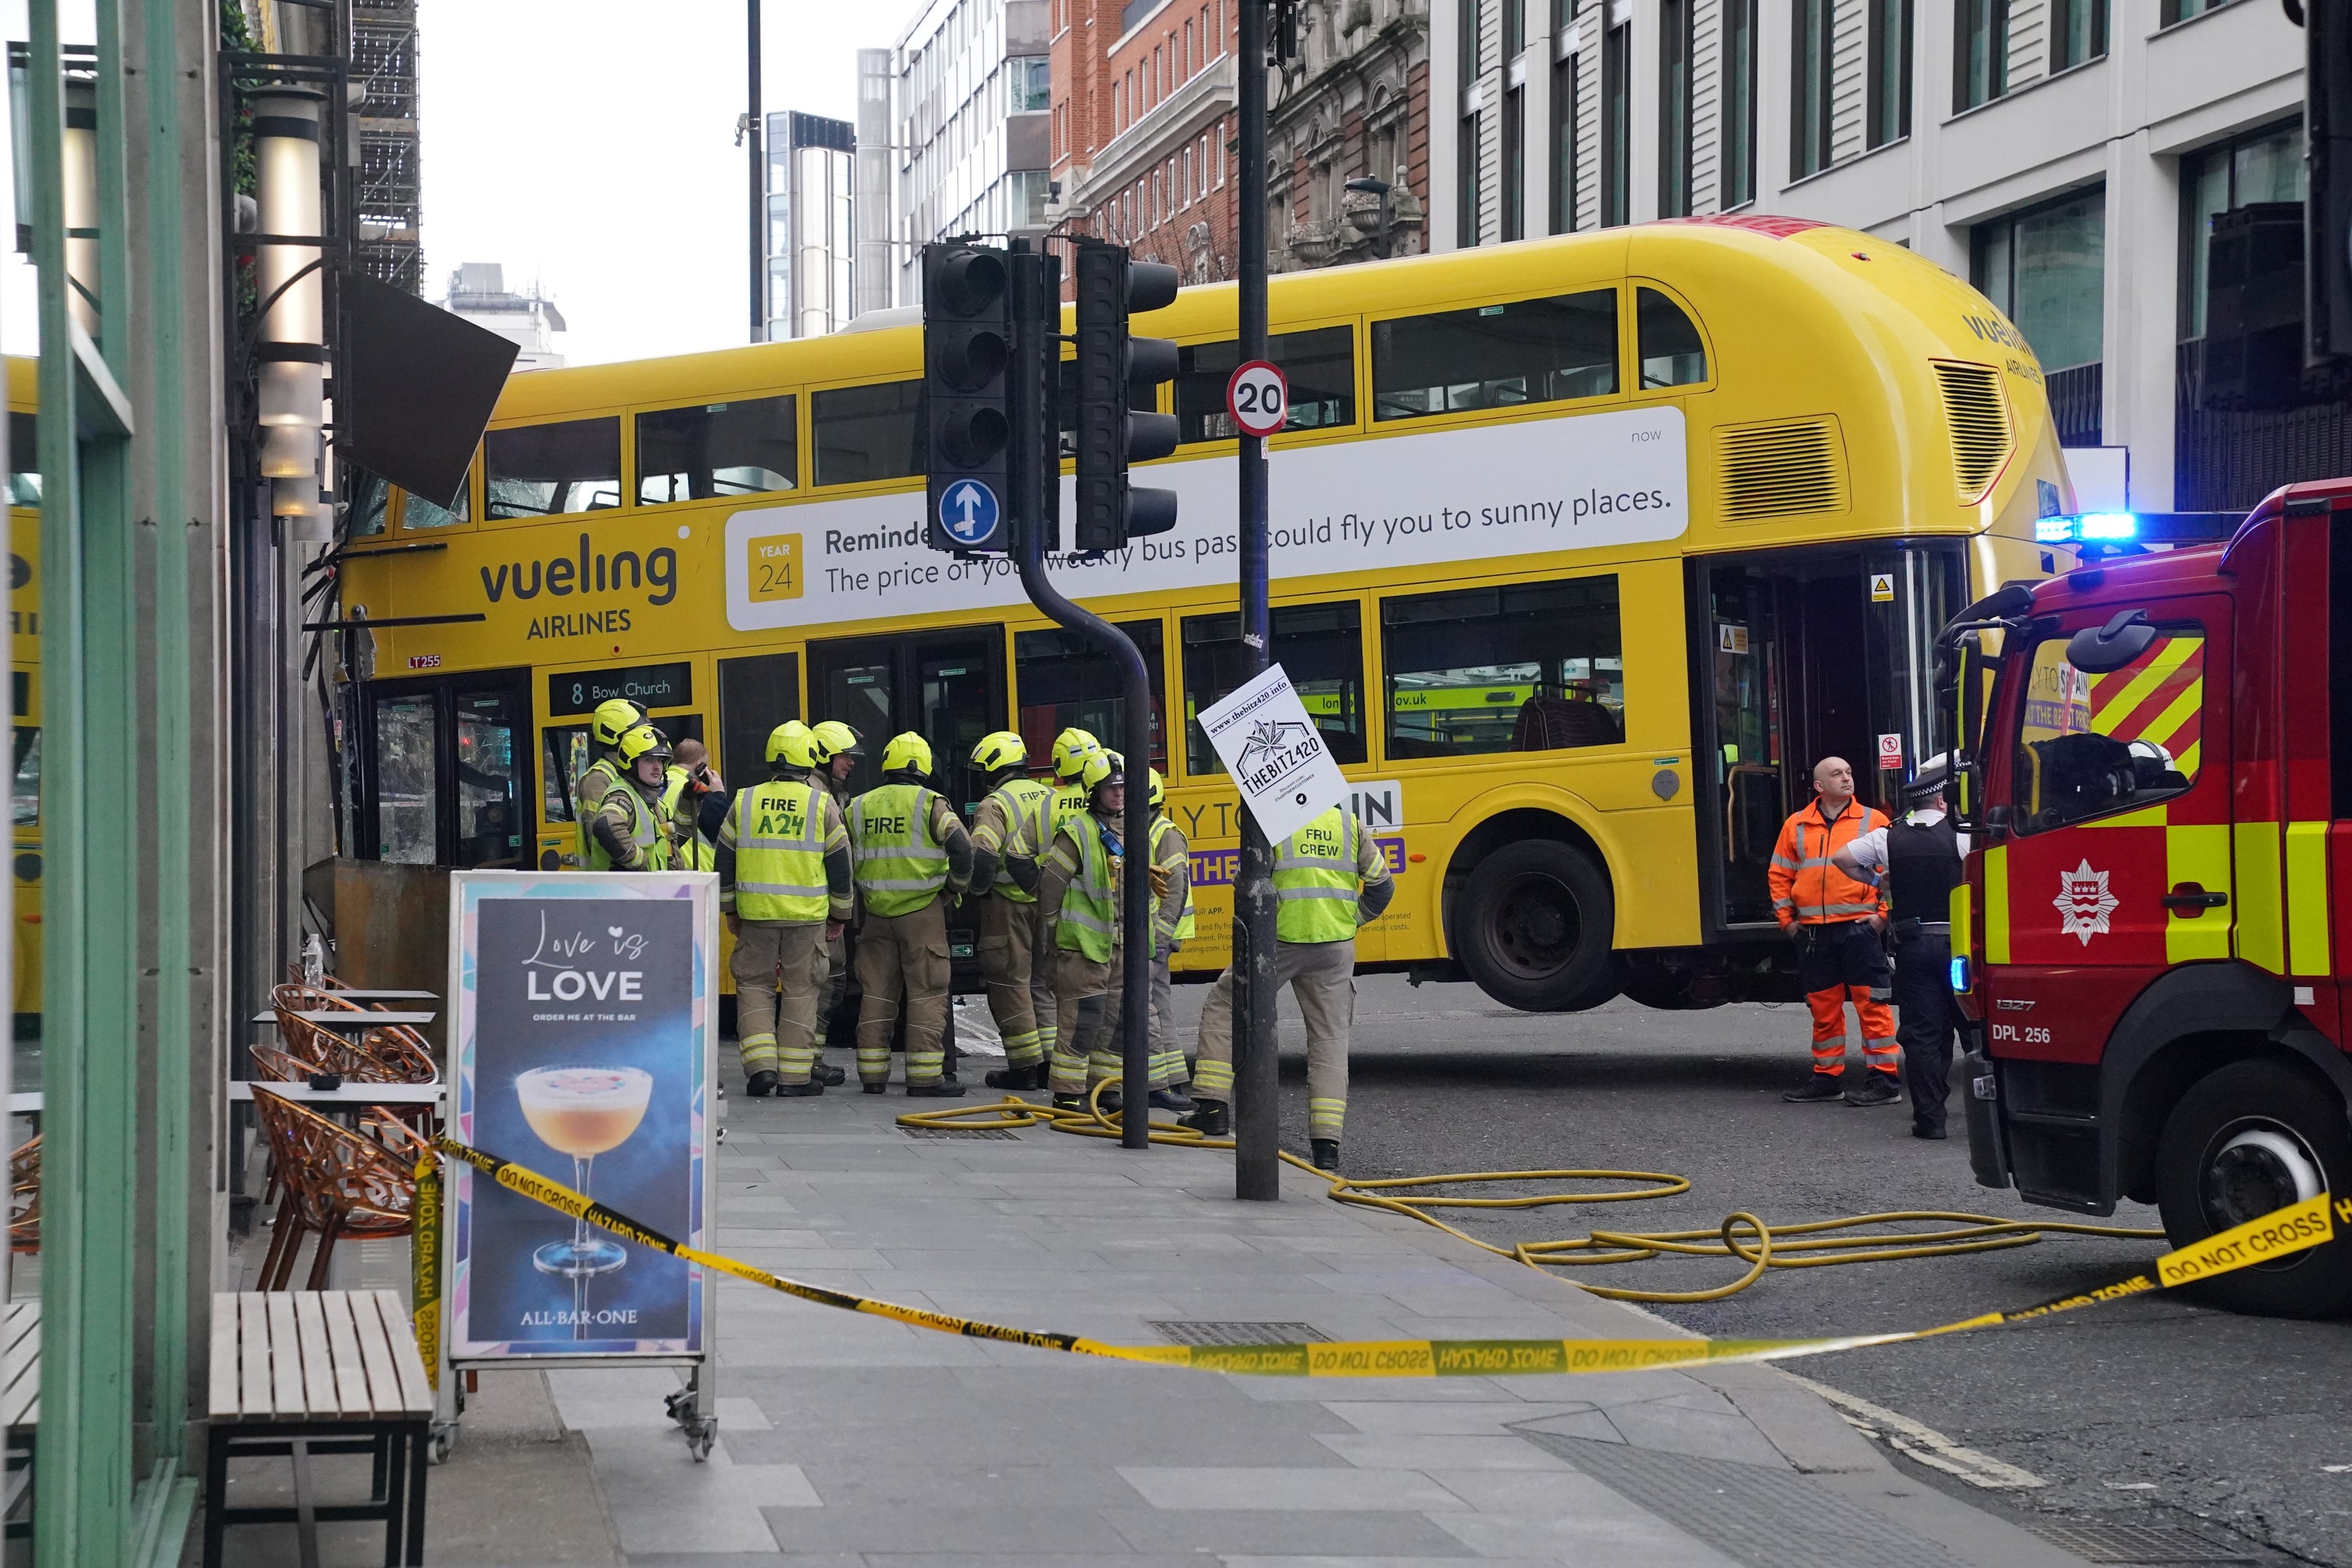 The bus is pulled from the shop front